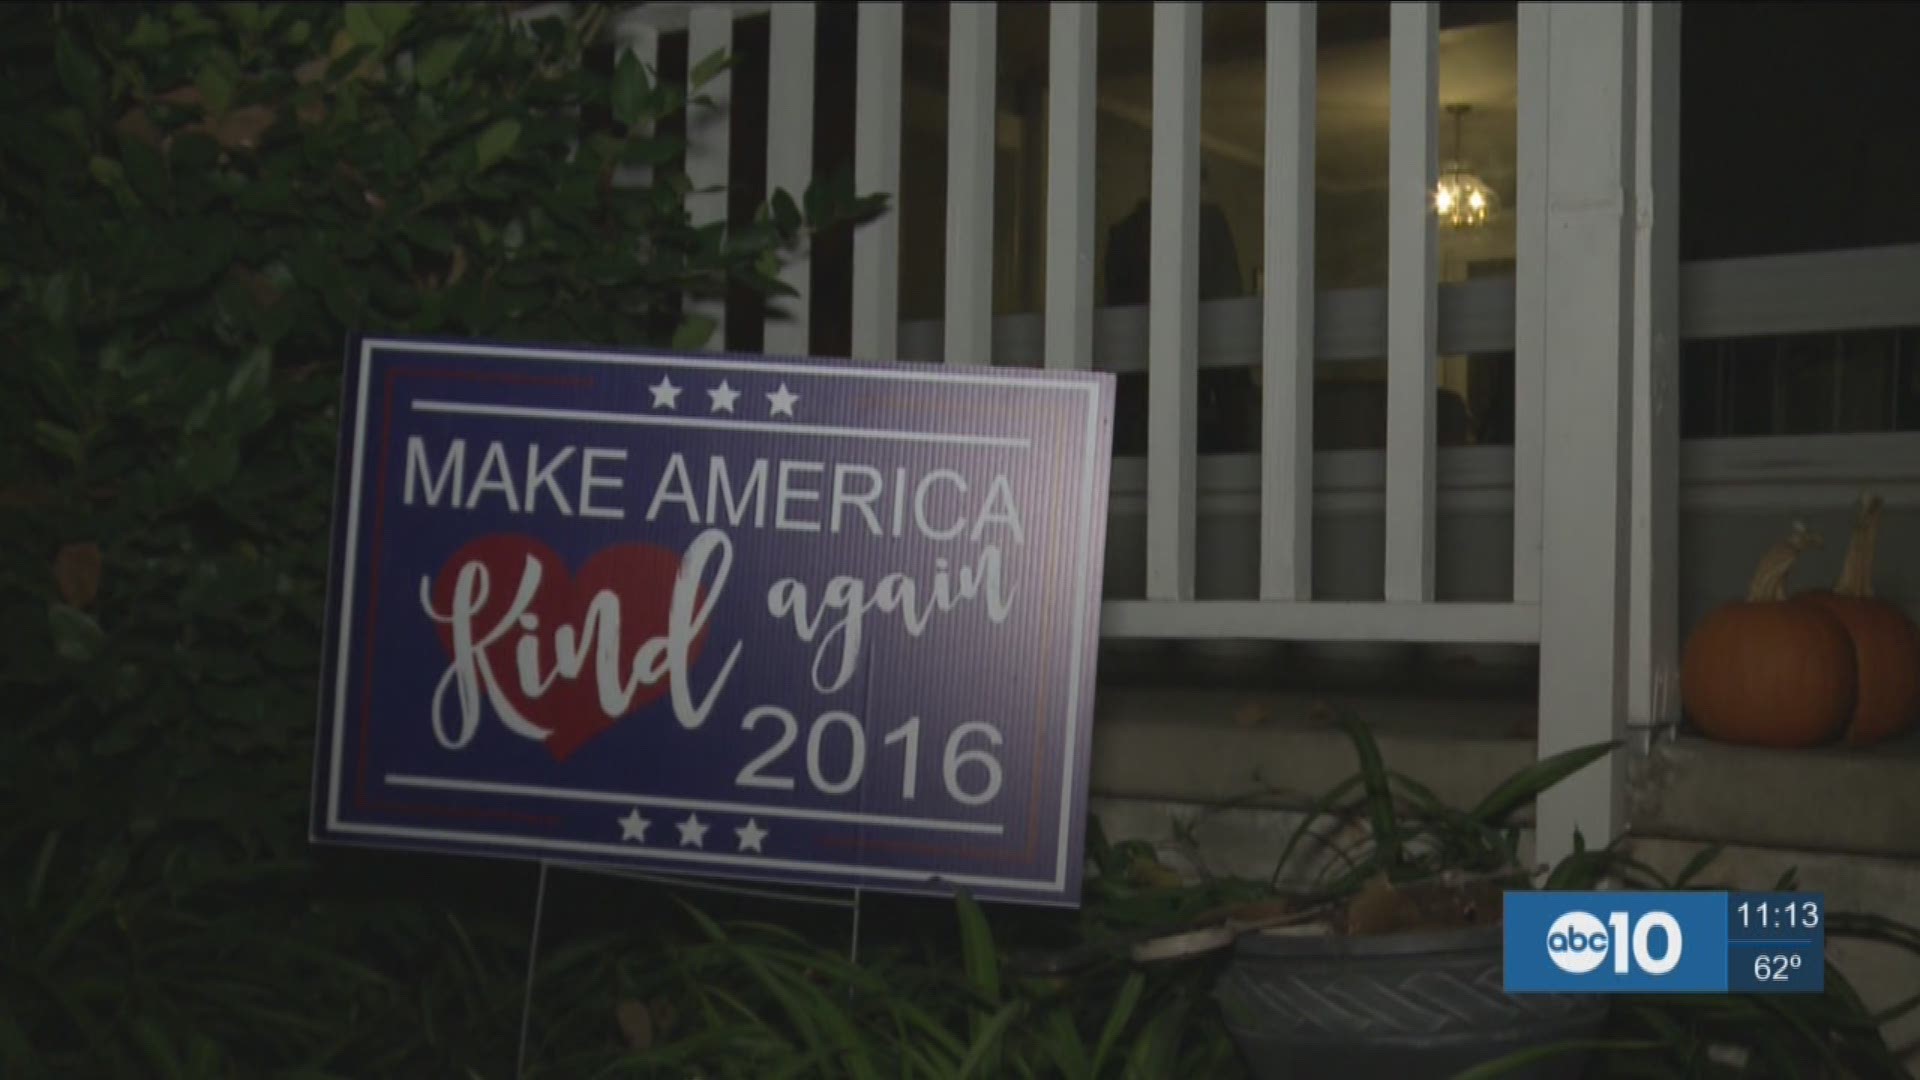 Sacramento mom who went viral over lawn signs continues to promote kindness. (NOv. 11, 2016)